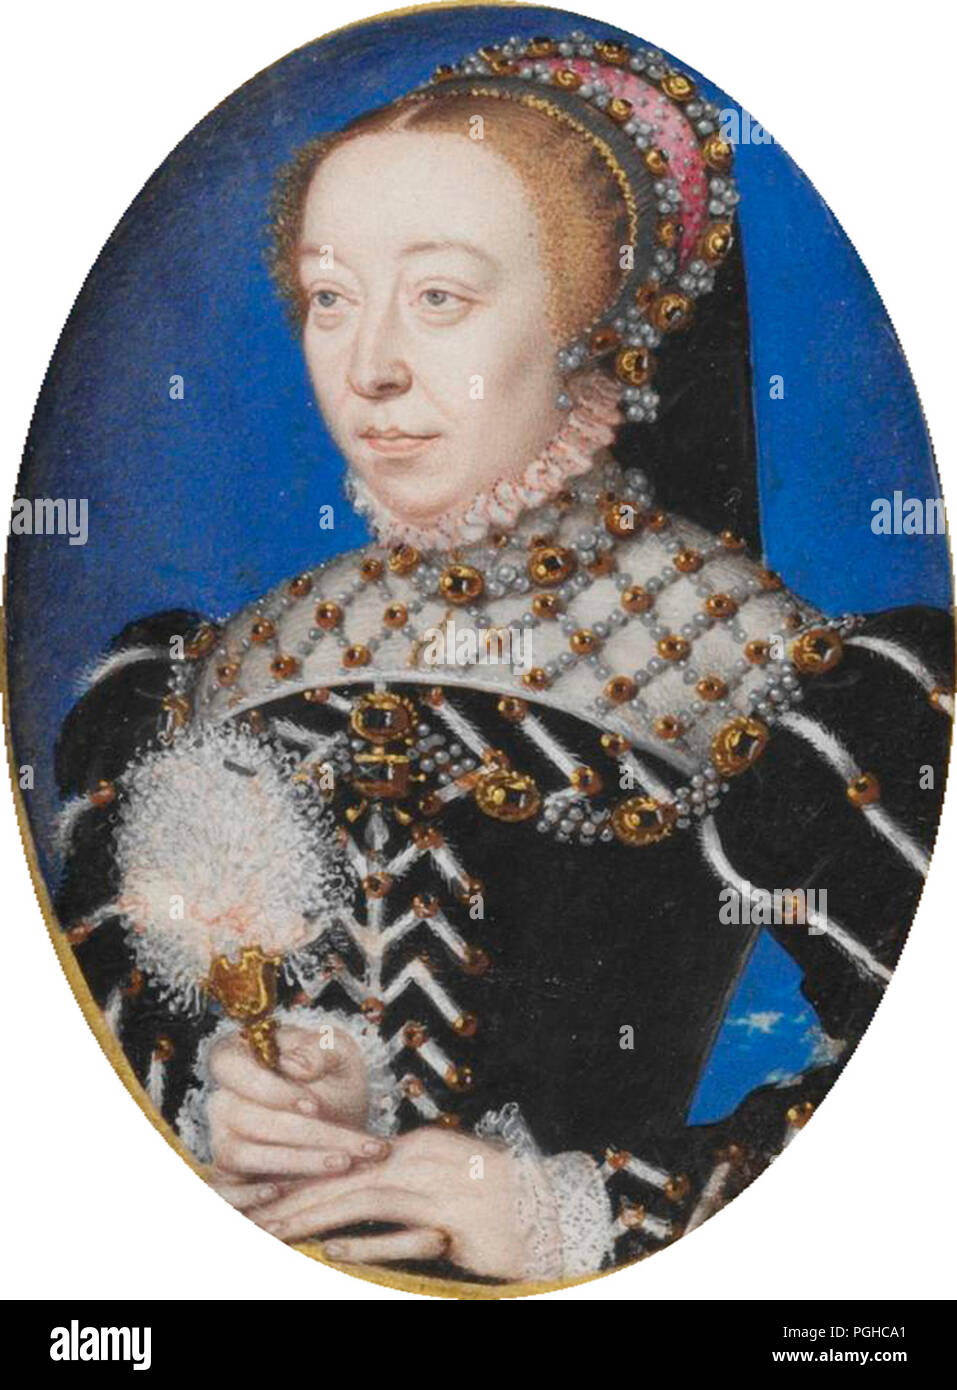 Catherine de Medici by François Clouet, 1555 Caterina de Medici, (1519 – 1589), Italian noblewoman who was queen of France from 1547 until 1559 Stock Photo